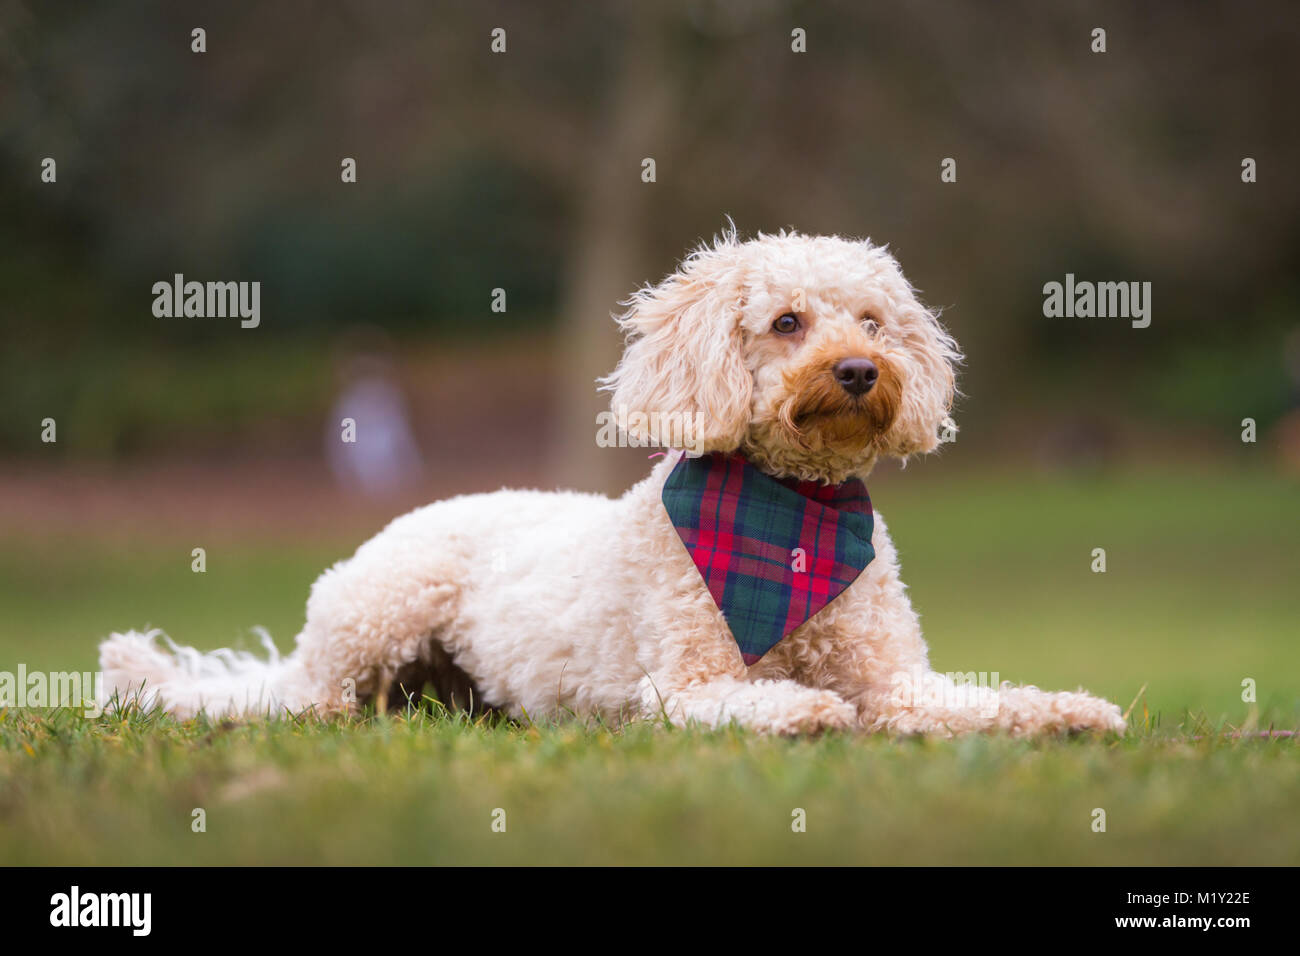 Little puppy terrier dog lying on the grass in a park Stock Photo